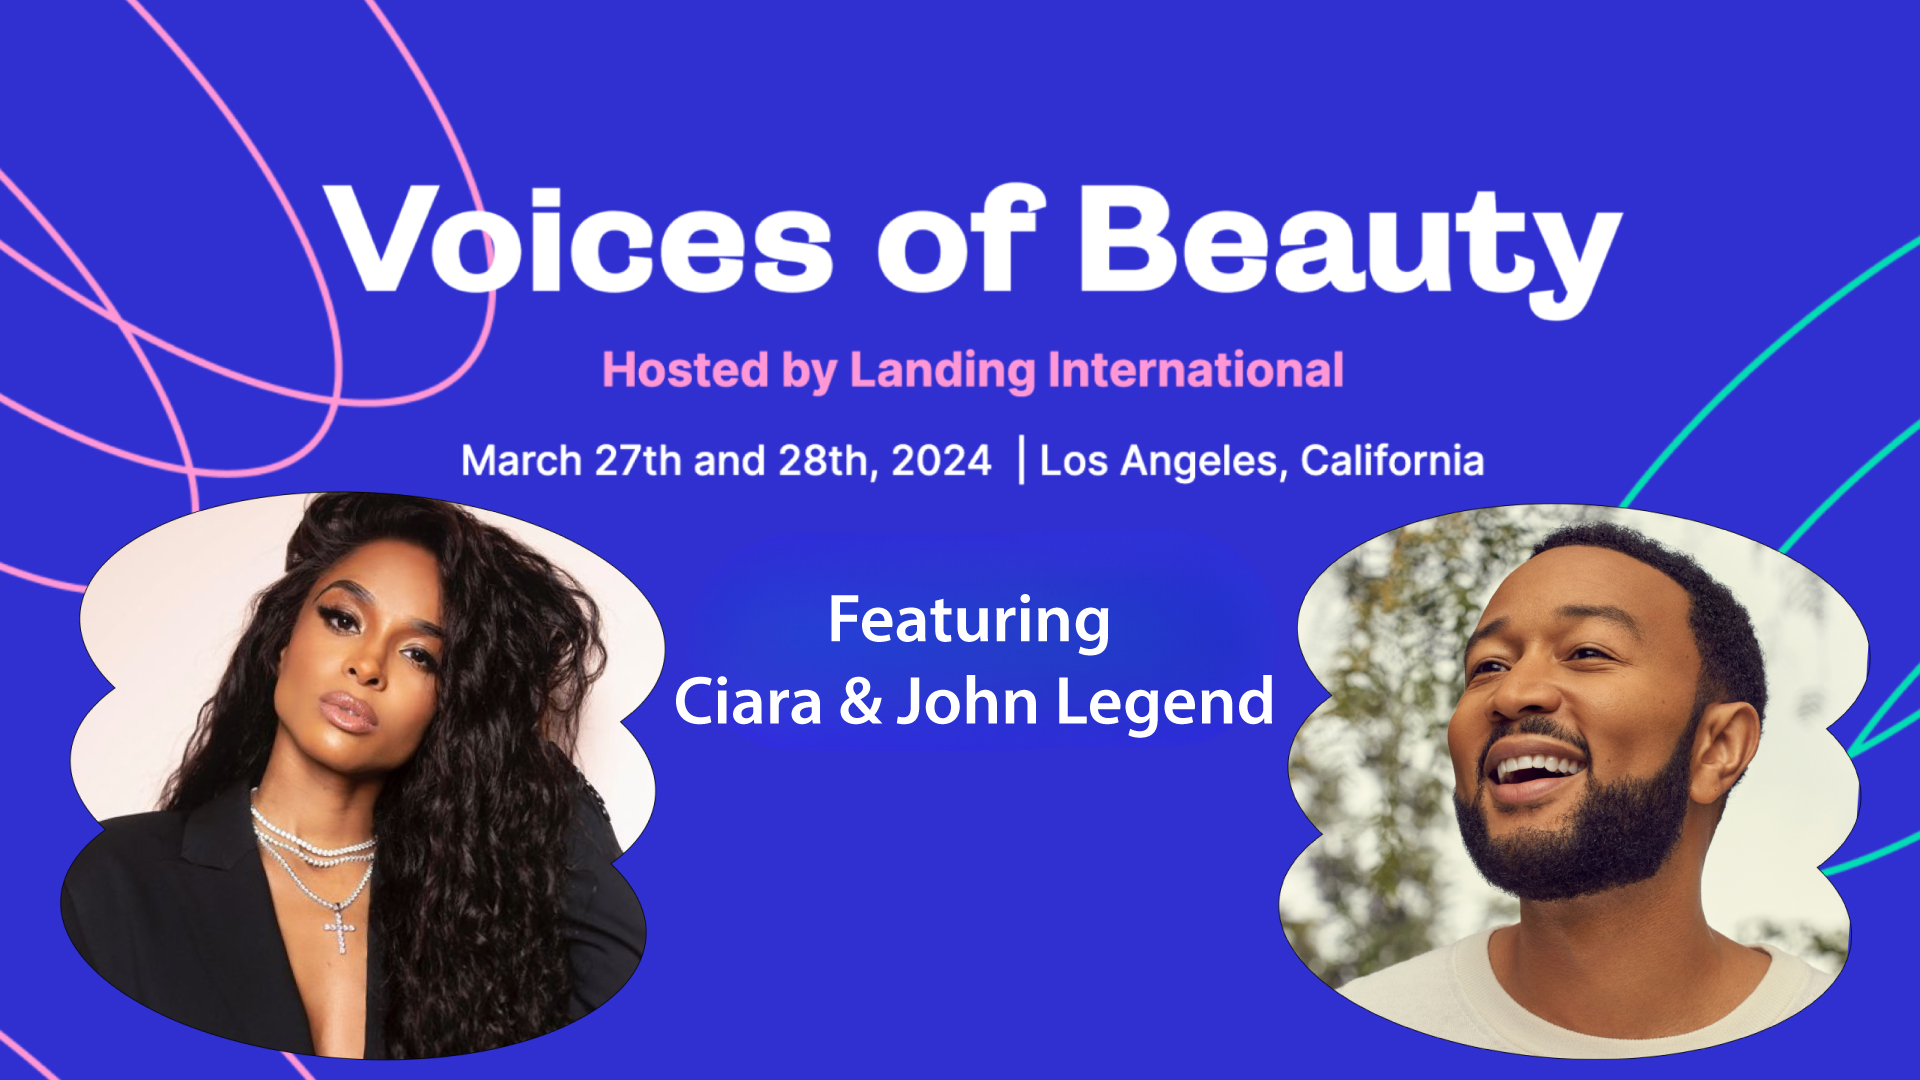 The Voices of Beauty Summit